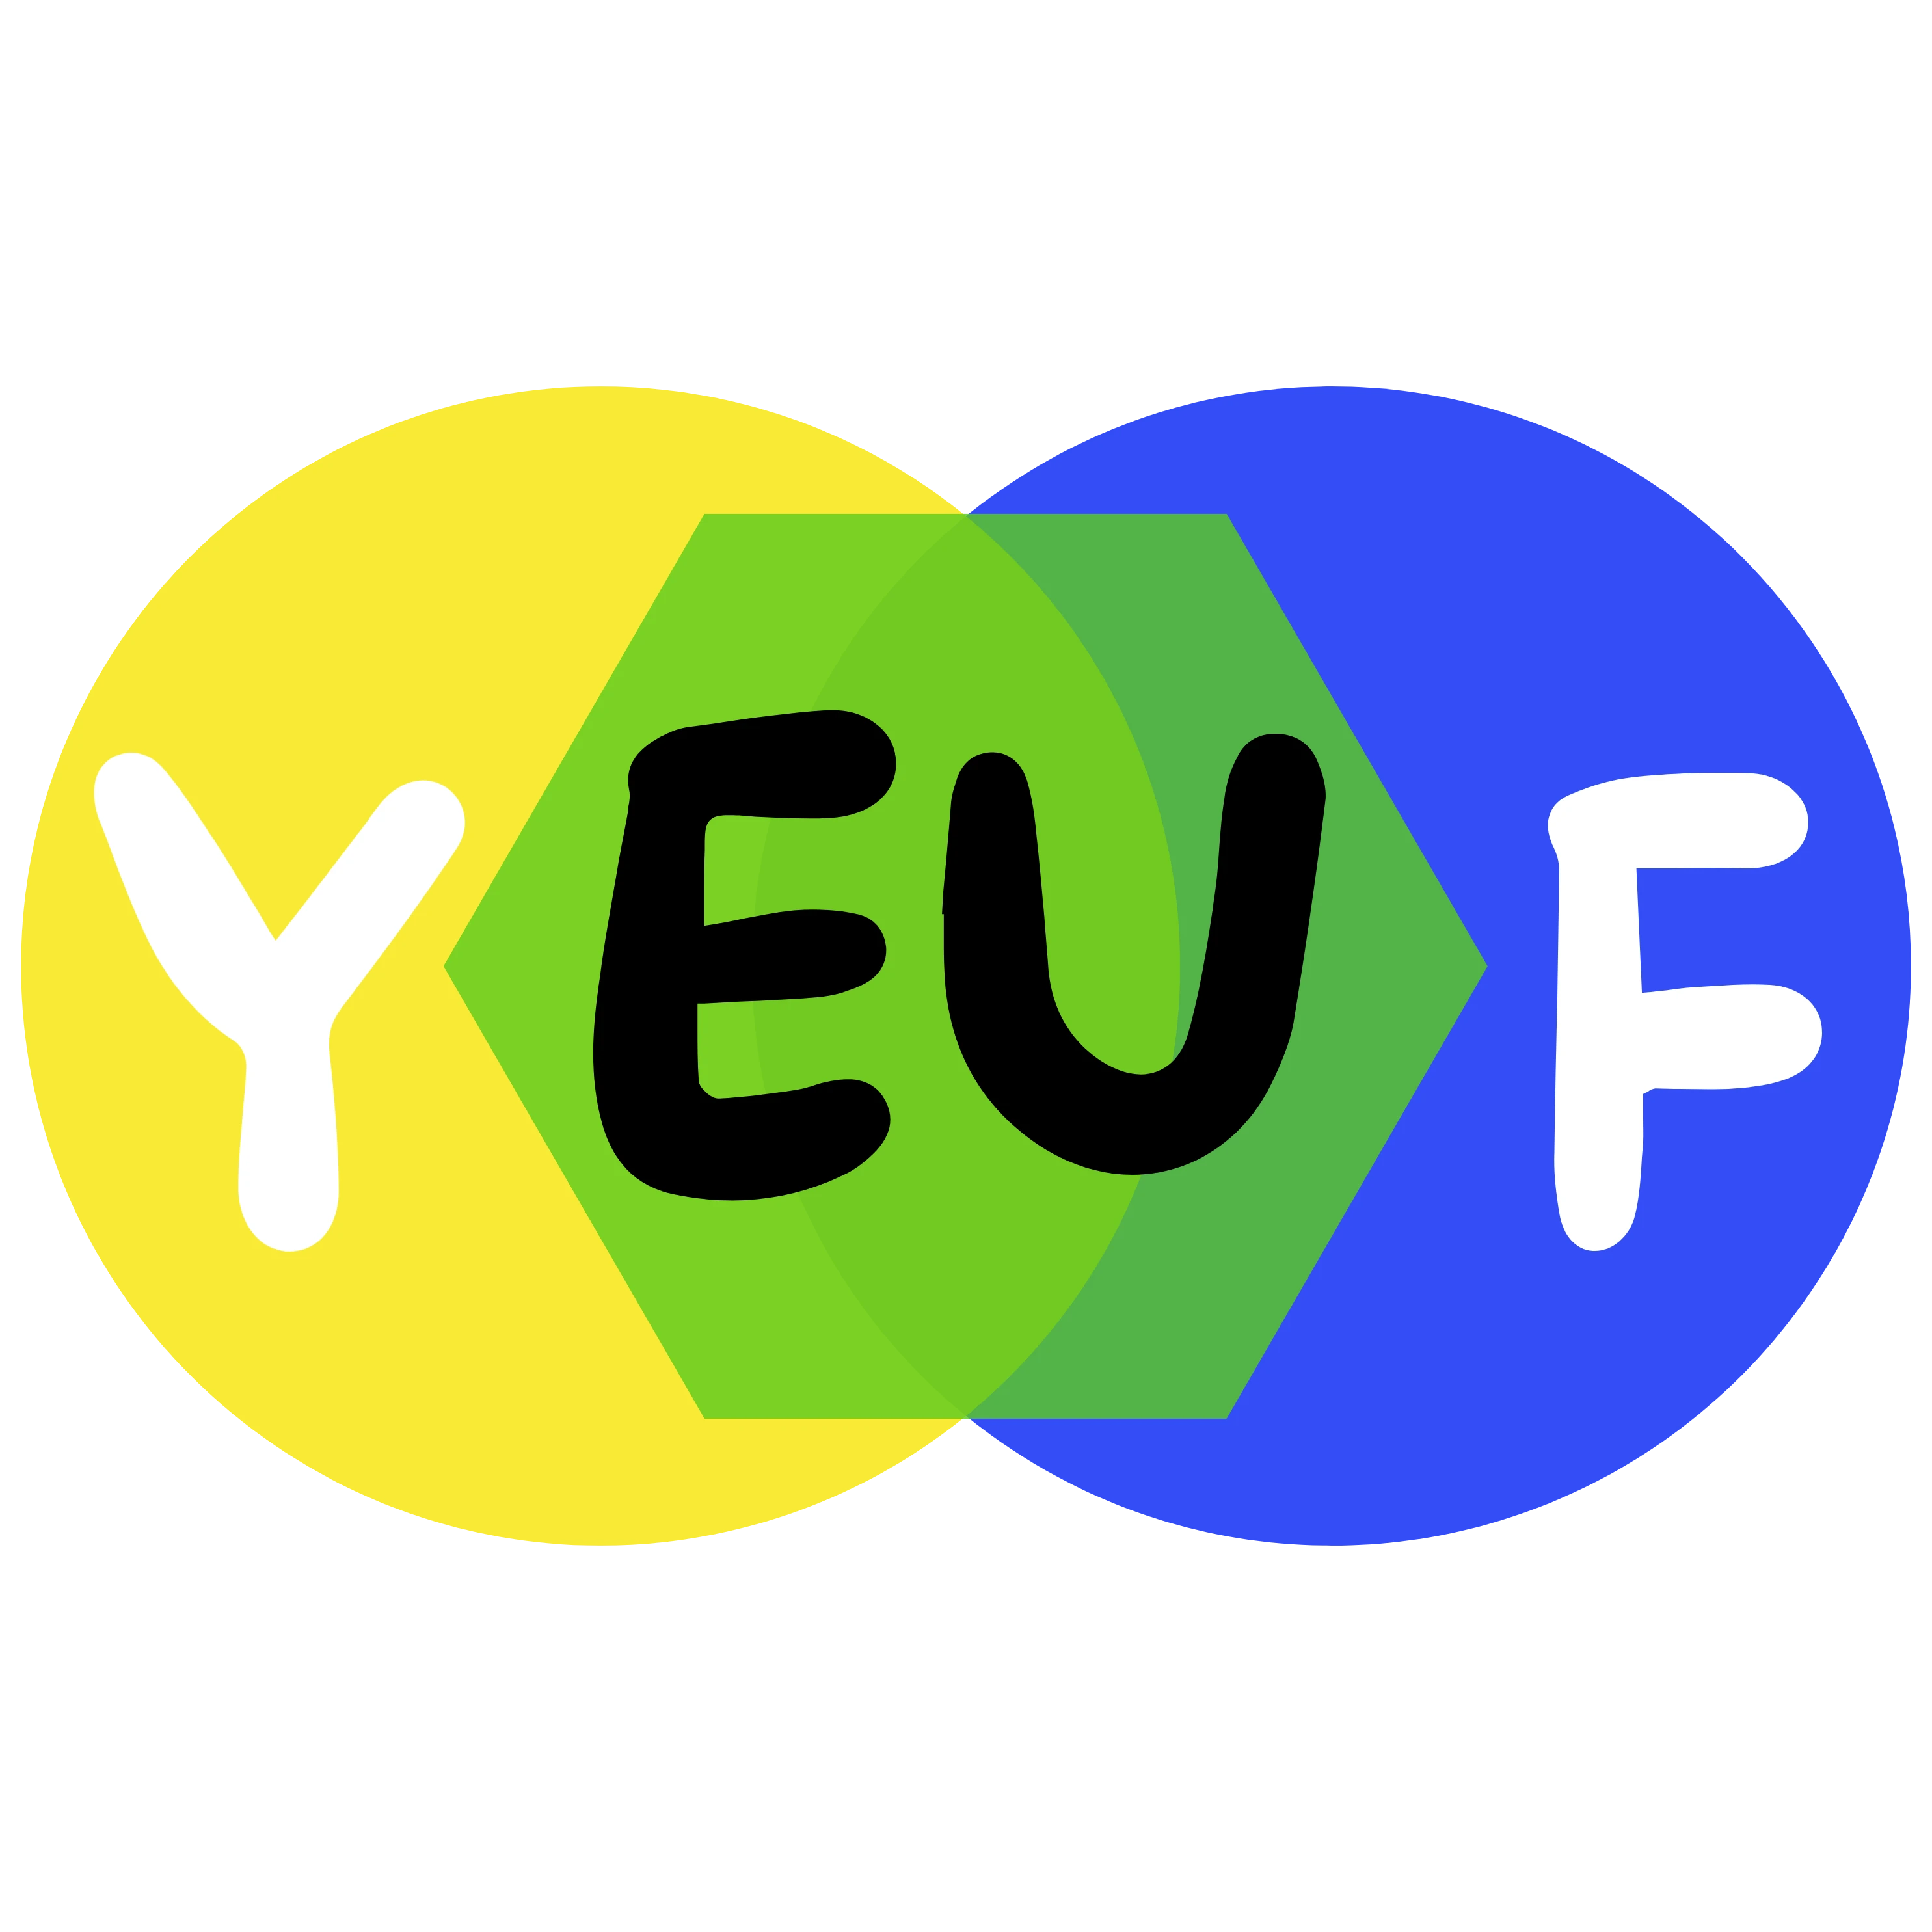 917-yeuf-project-logo-high-res-17064638290835.png